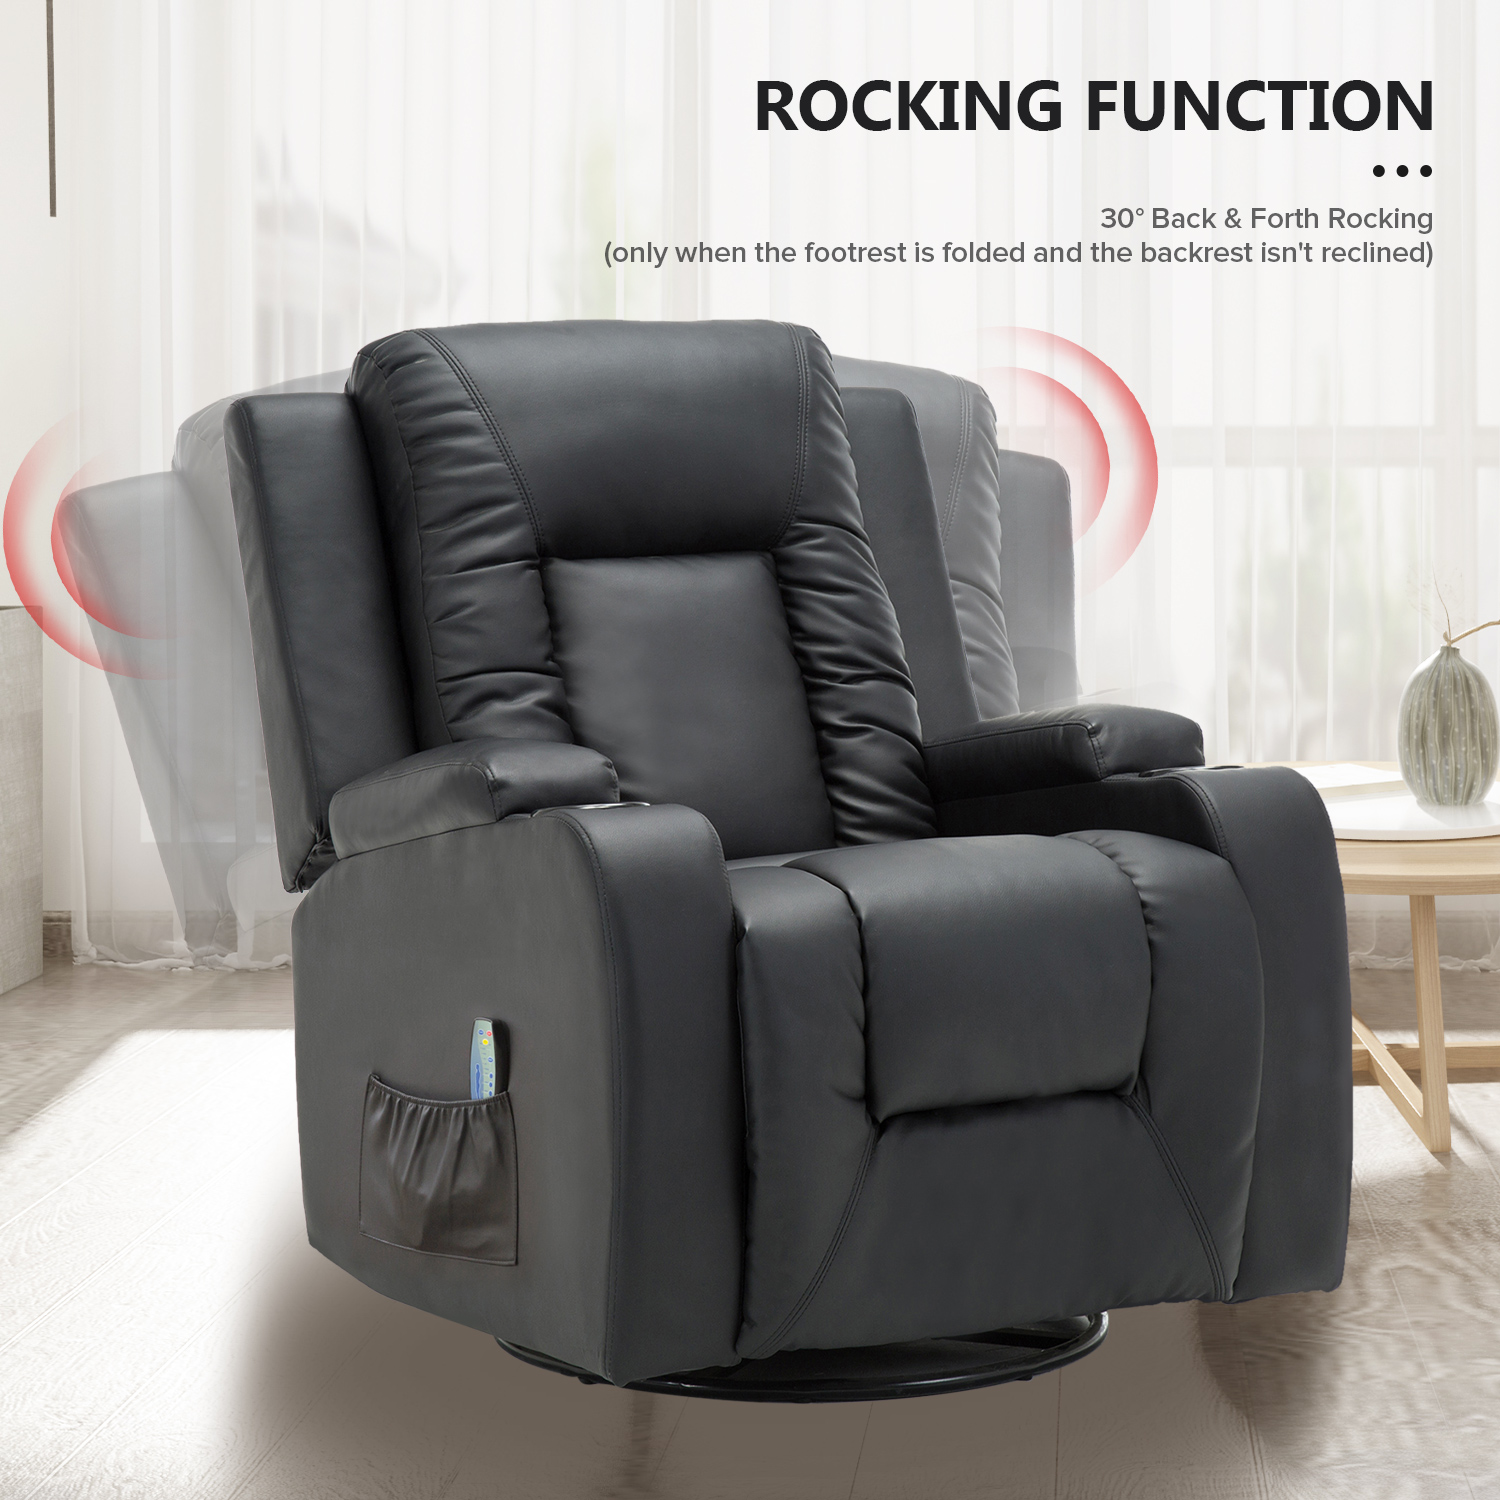 COMHOMA Swivel Rocker Recliner Chair PU Leather Rocking Sofa with Heated Massage, Black - image 3 of 8